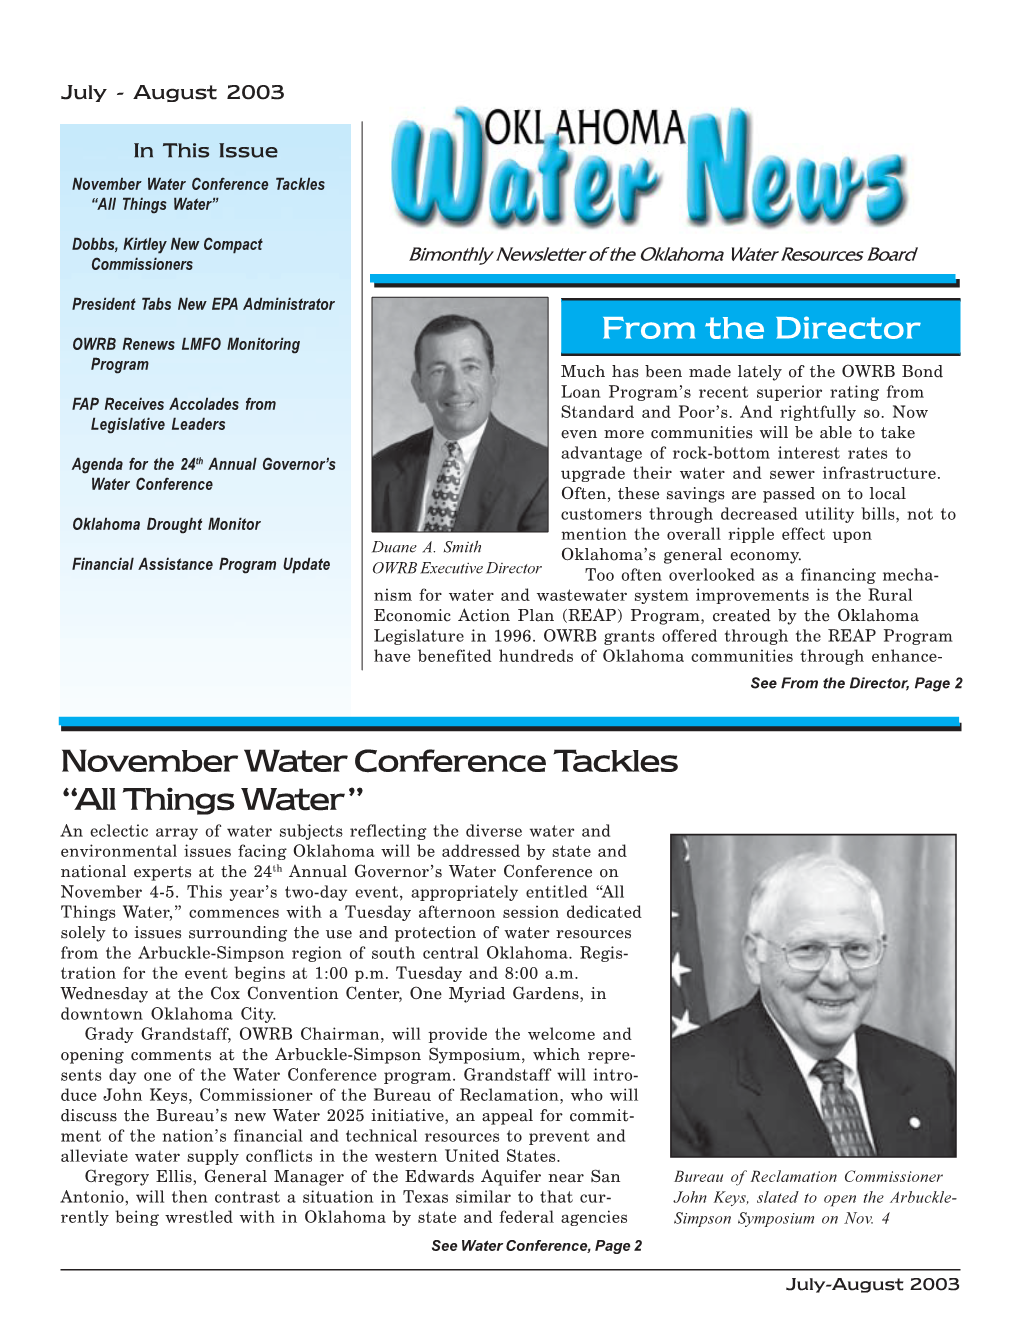 Oklahoma Water News -- July-August 2003